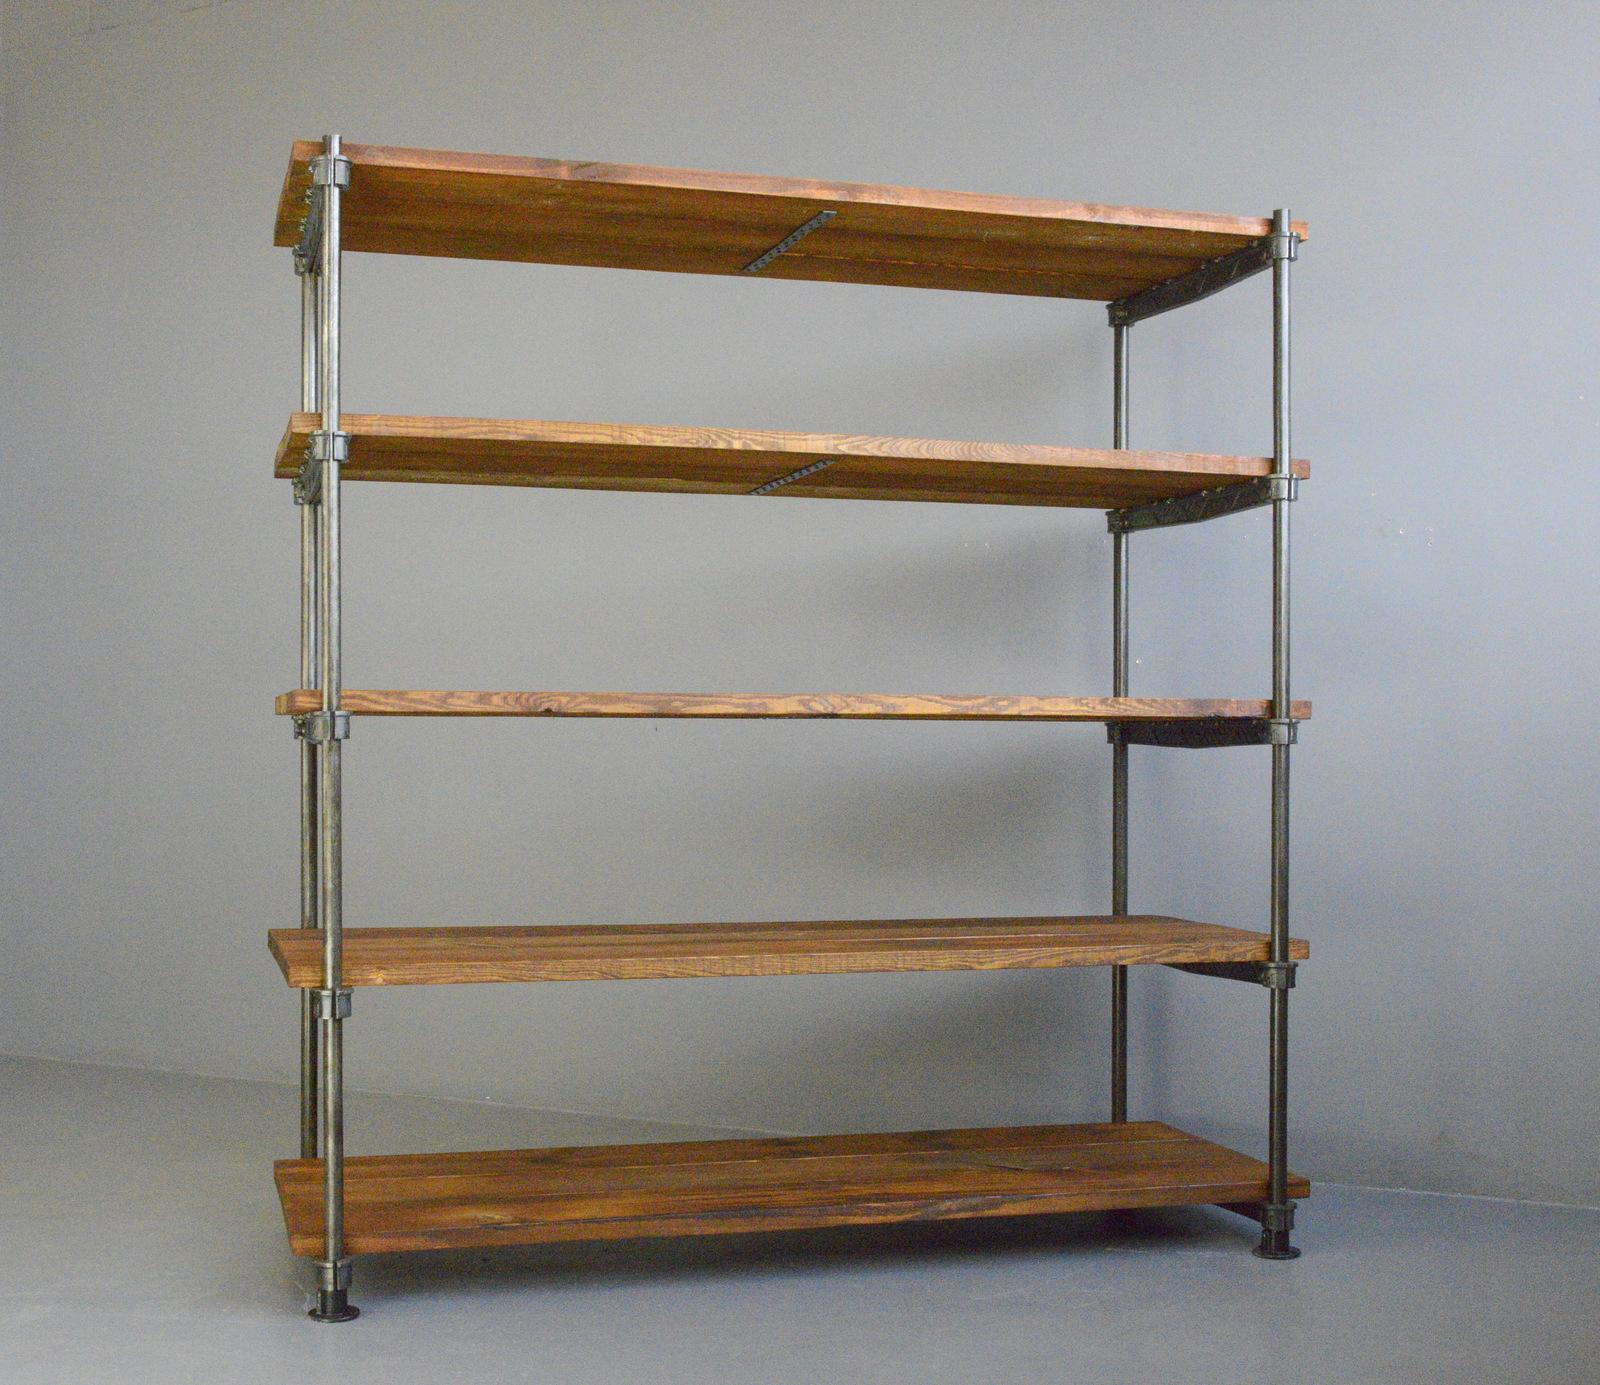 Industrial shelves by Meier & Weichelt Circa 1920s

- Cast iron brackets with Jugenstil details
- Heavy pine shelves
- Height adjustable shelves
- Shelves have been given a coat of hard wax oil 
- Produced by Meier & Weichelt, Leipzig
-